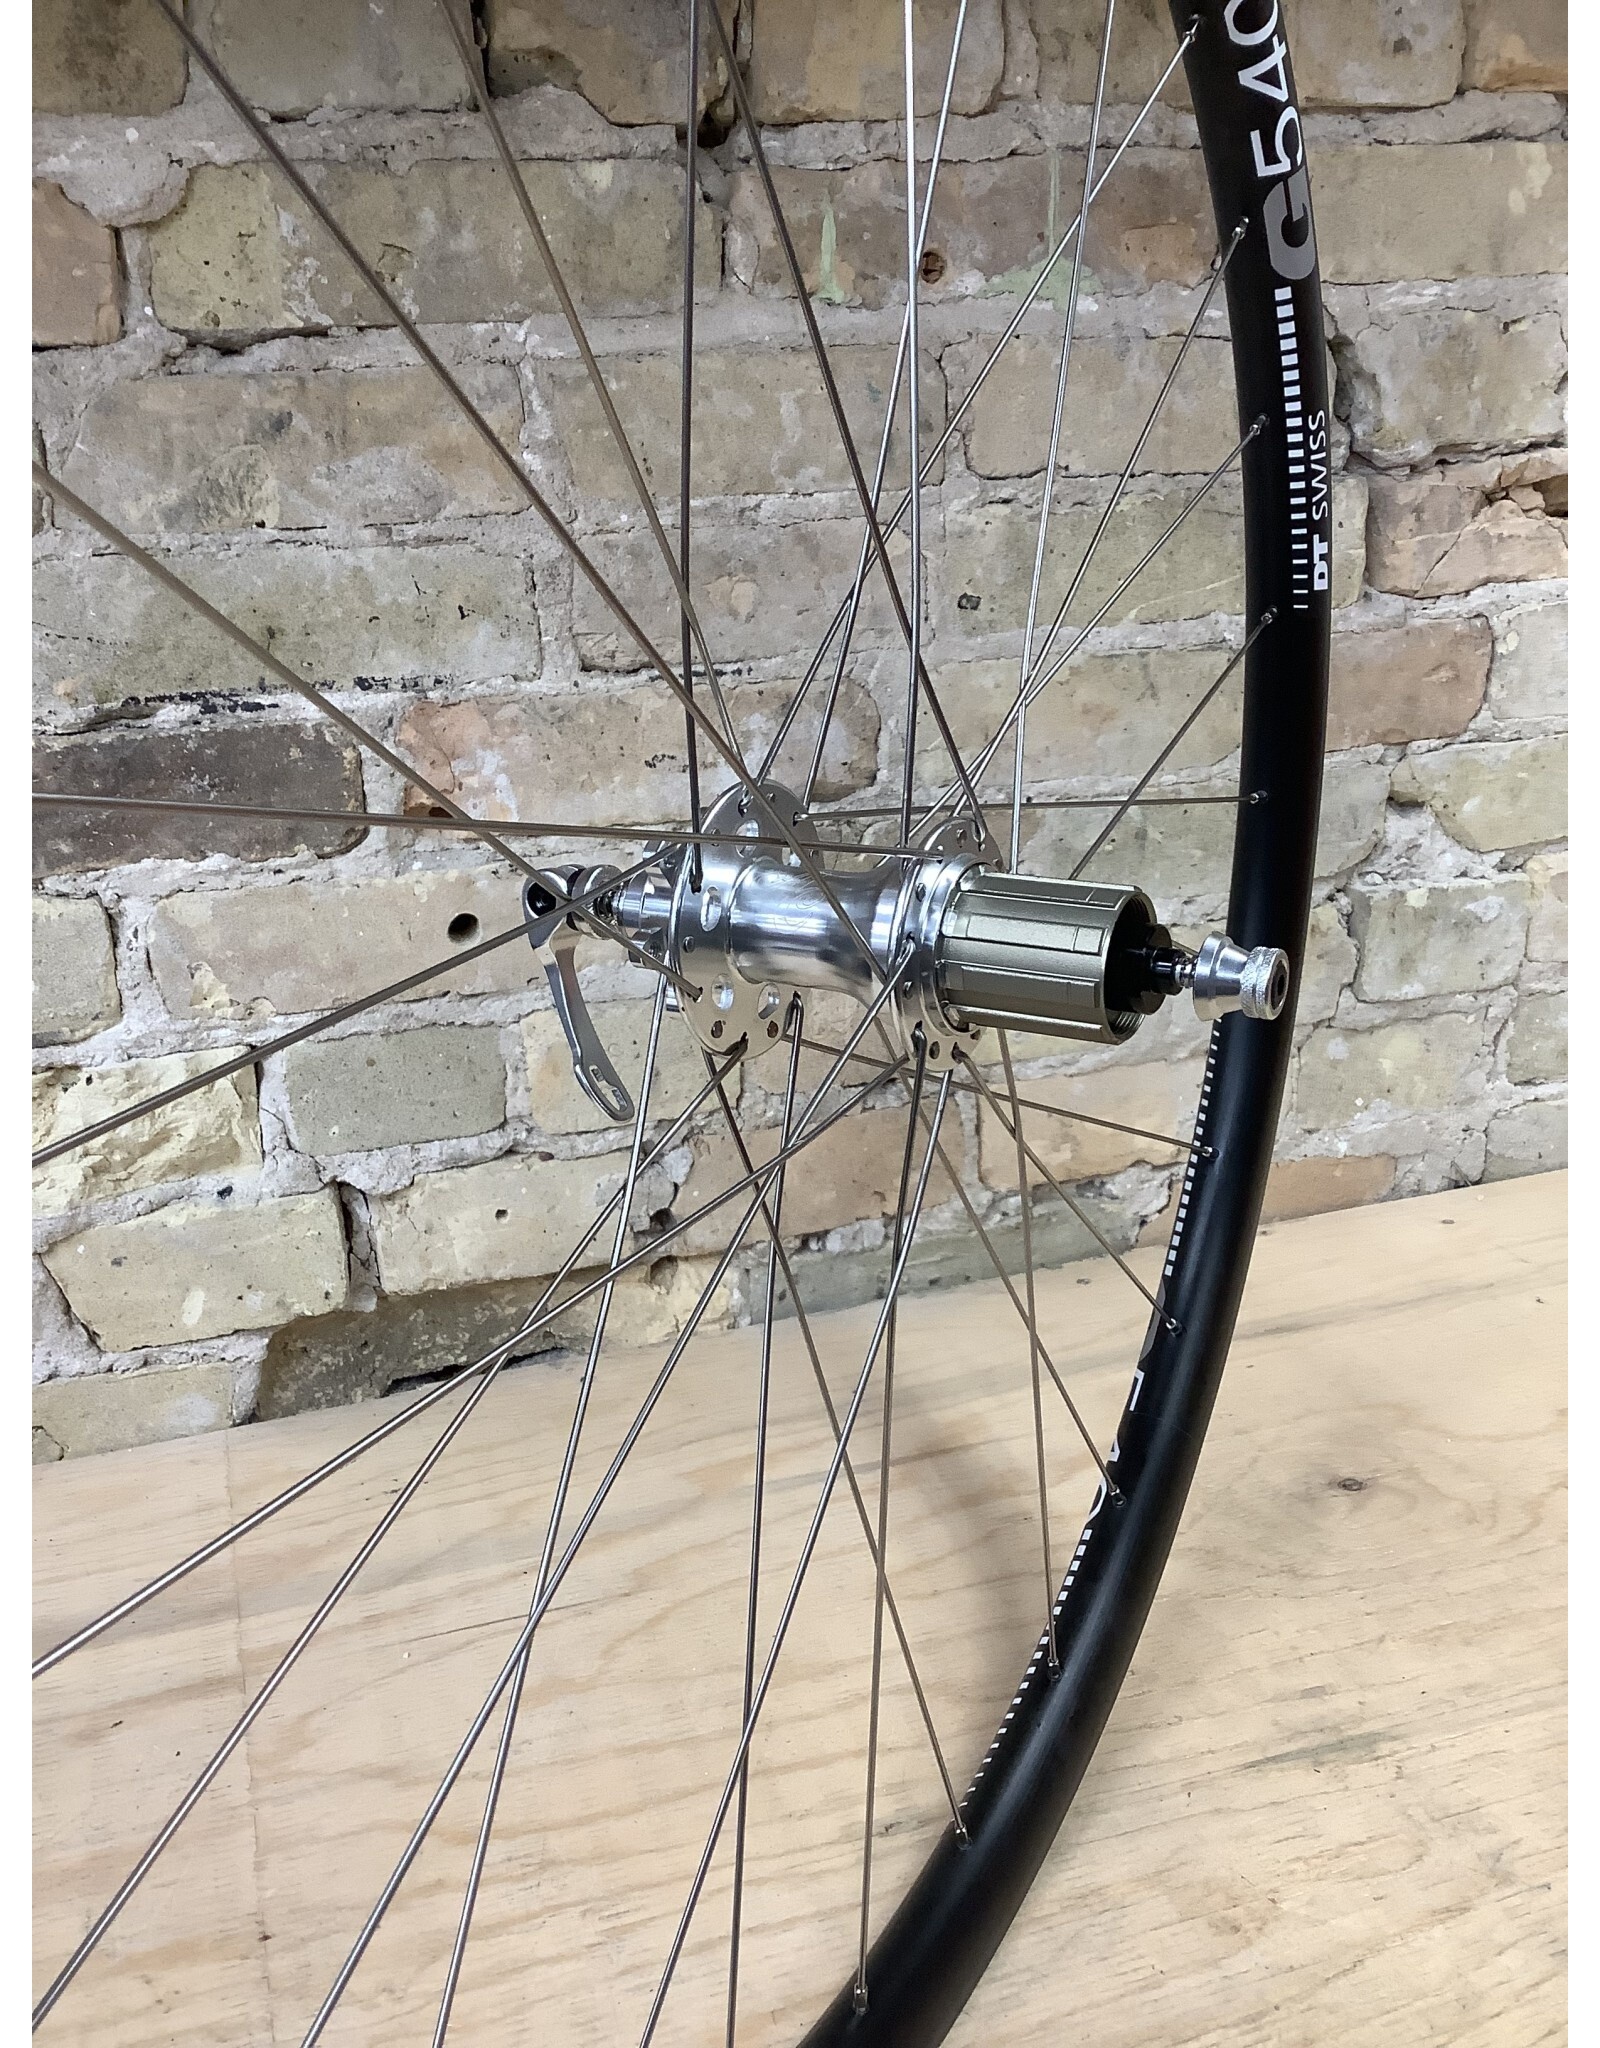 Natural Cycleworks Handbuilt Wheel 700c - DT Swiss G540 - All City Go Devil Rear - Doubled Butted Spokes Silver